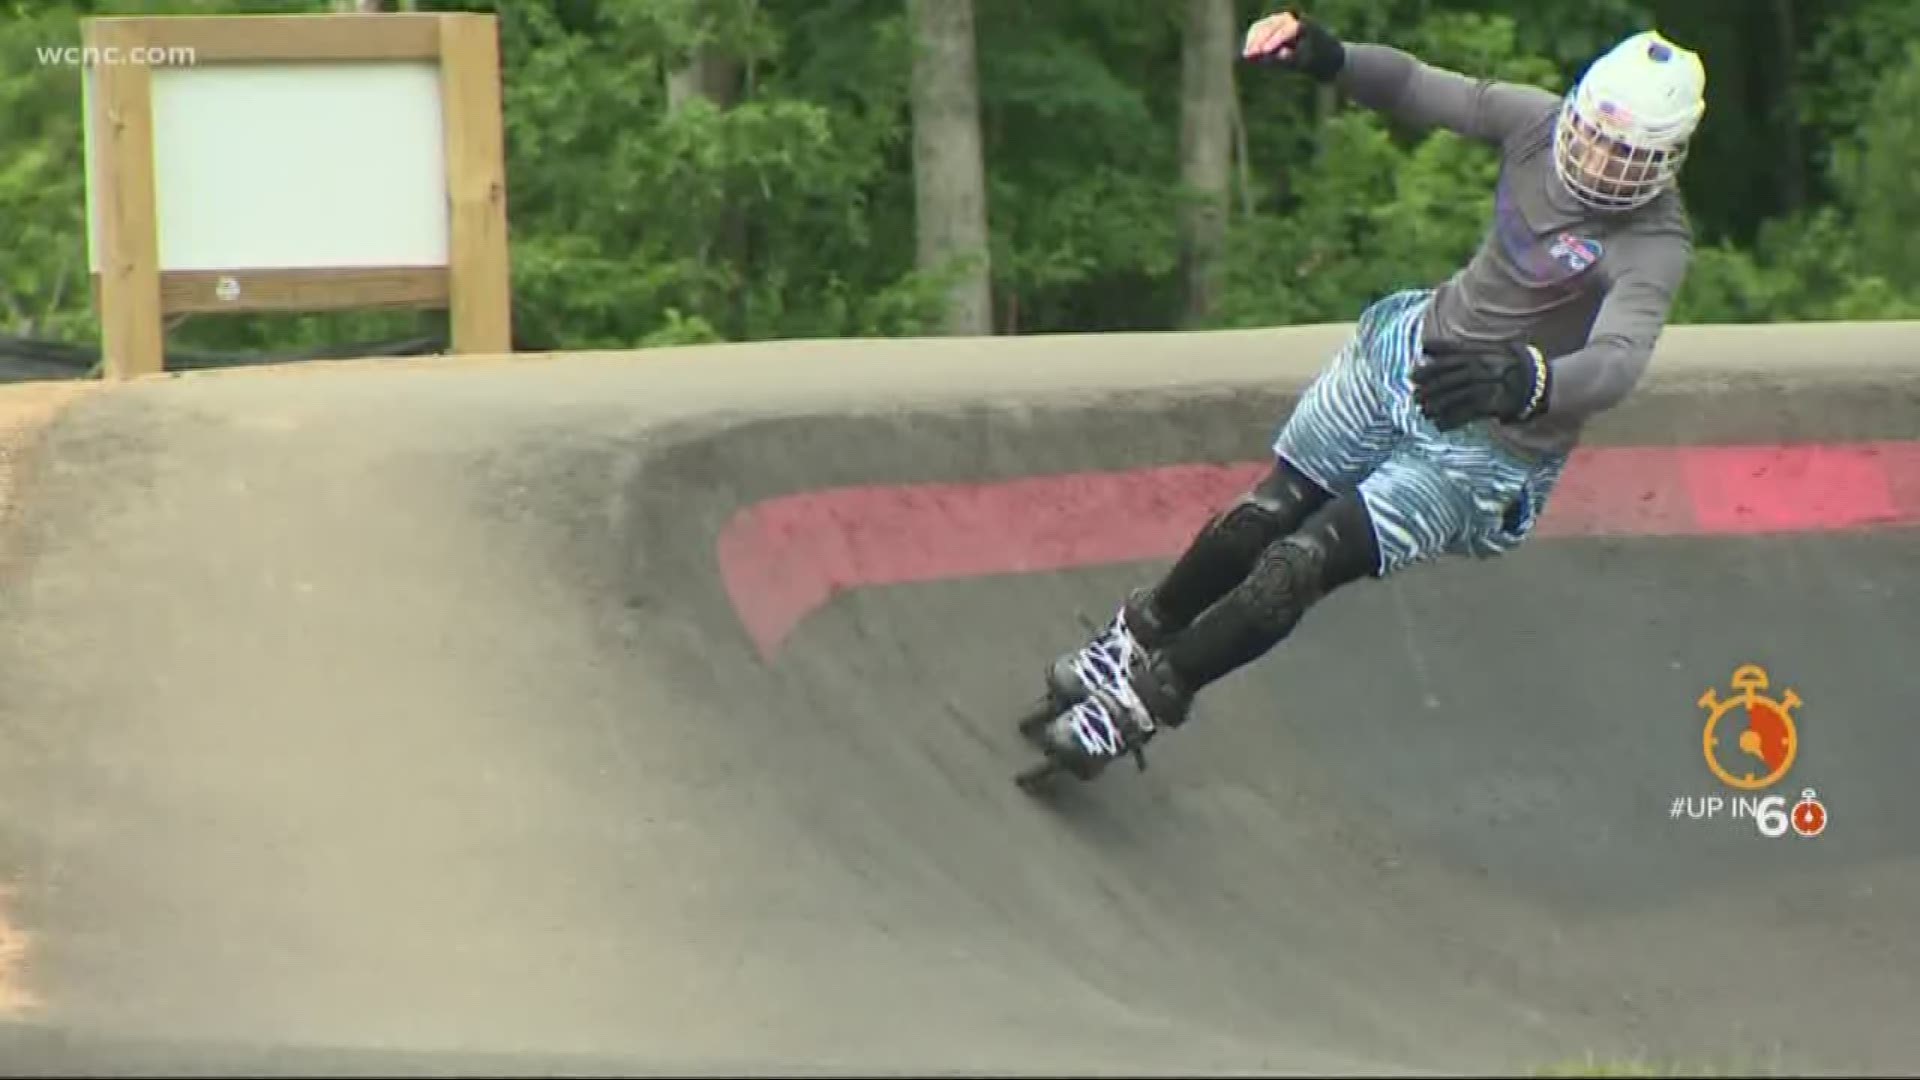 For everything from skateboarding to rollerblading to BMX biking, Gaston County's new Poston Pump Track is the place to be this summer.